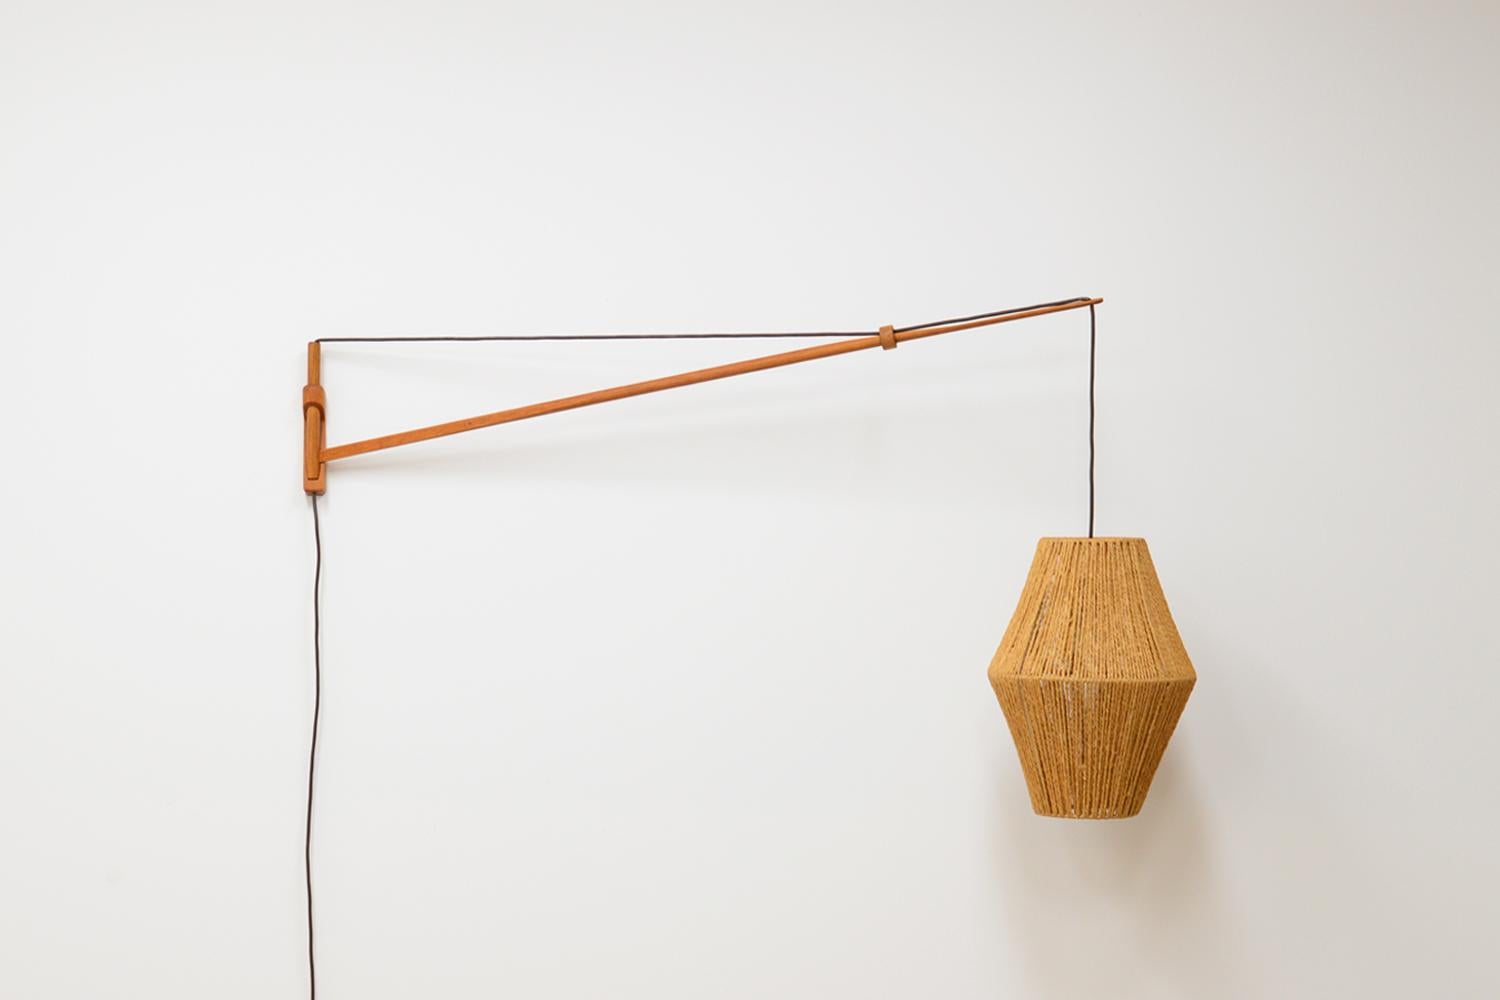 Large oak wall lamp by A. Bank Jensen & Kjeld Iversen for Louis Poulsen 50’s. The lamp can be adjusted to the left and right and up and down simply by pulling or releasing the wire. The lamp has a papercord shade. In very good vintage condition.